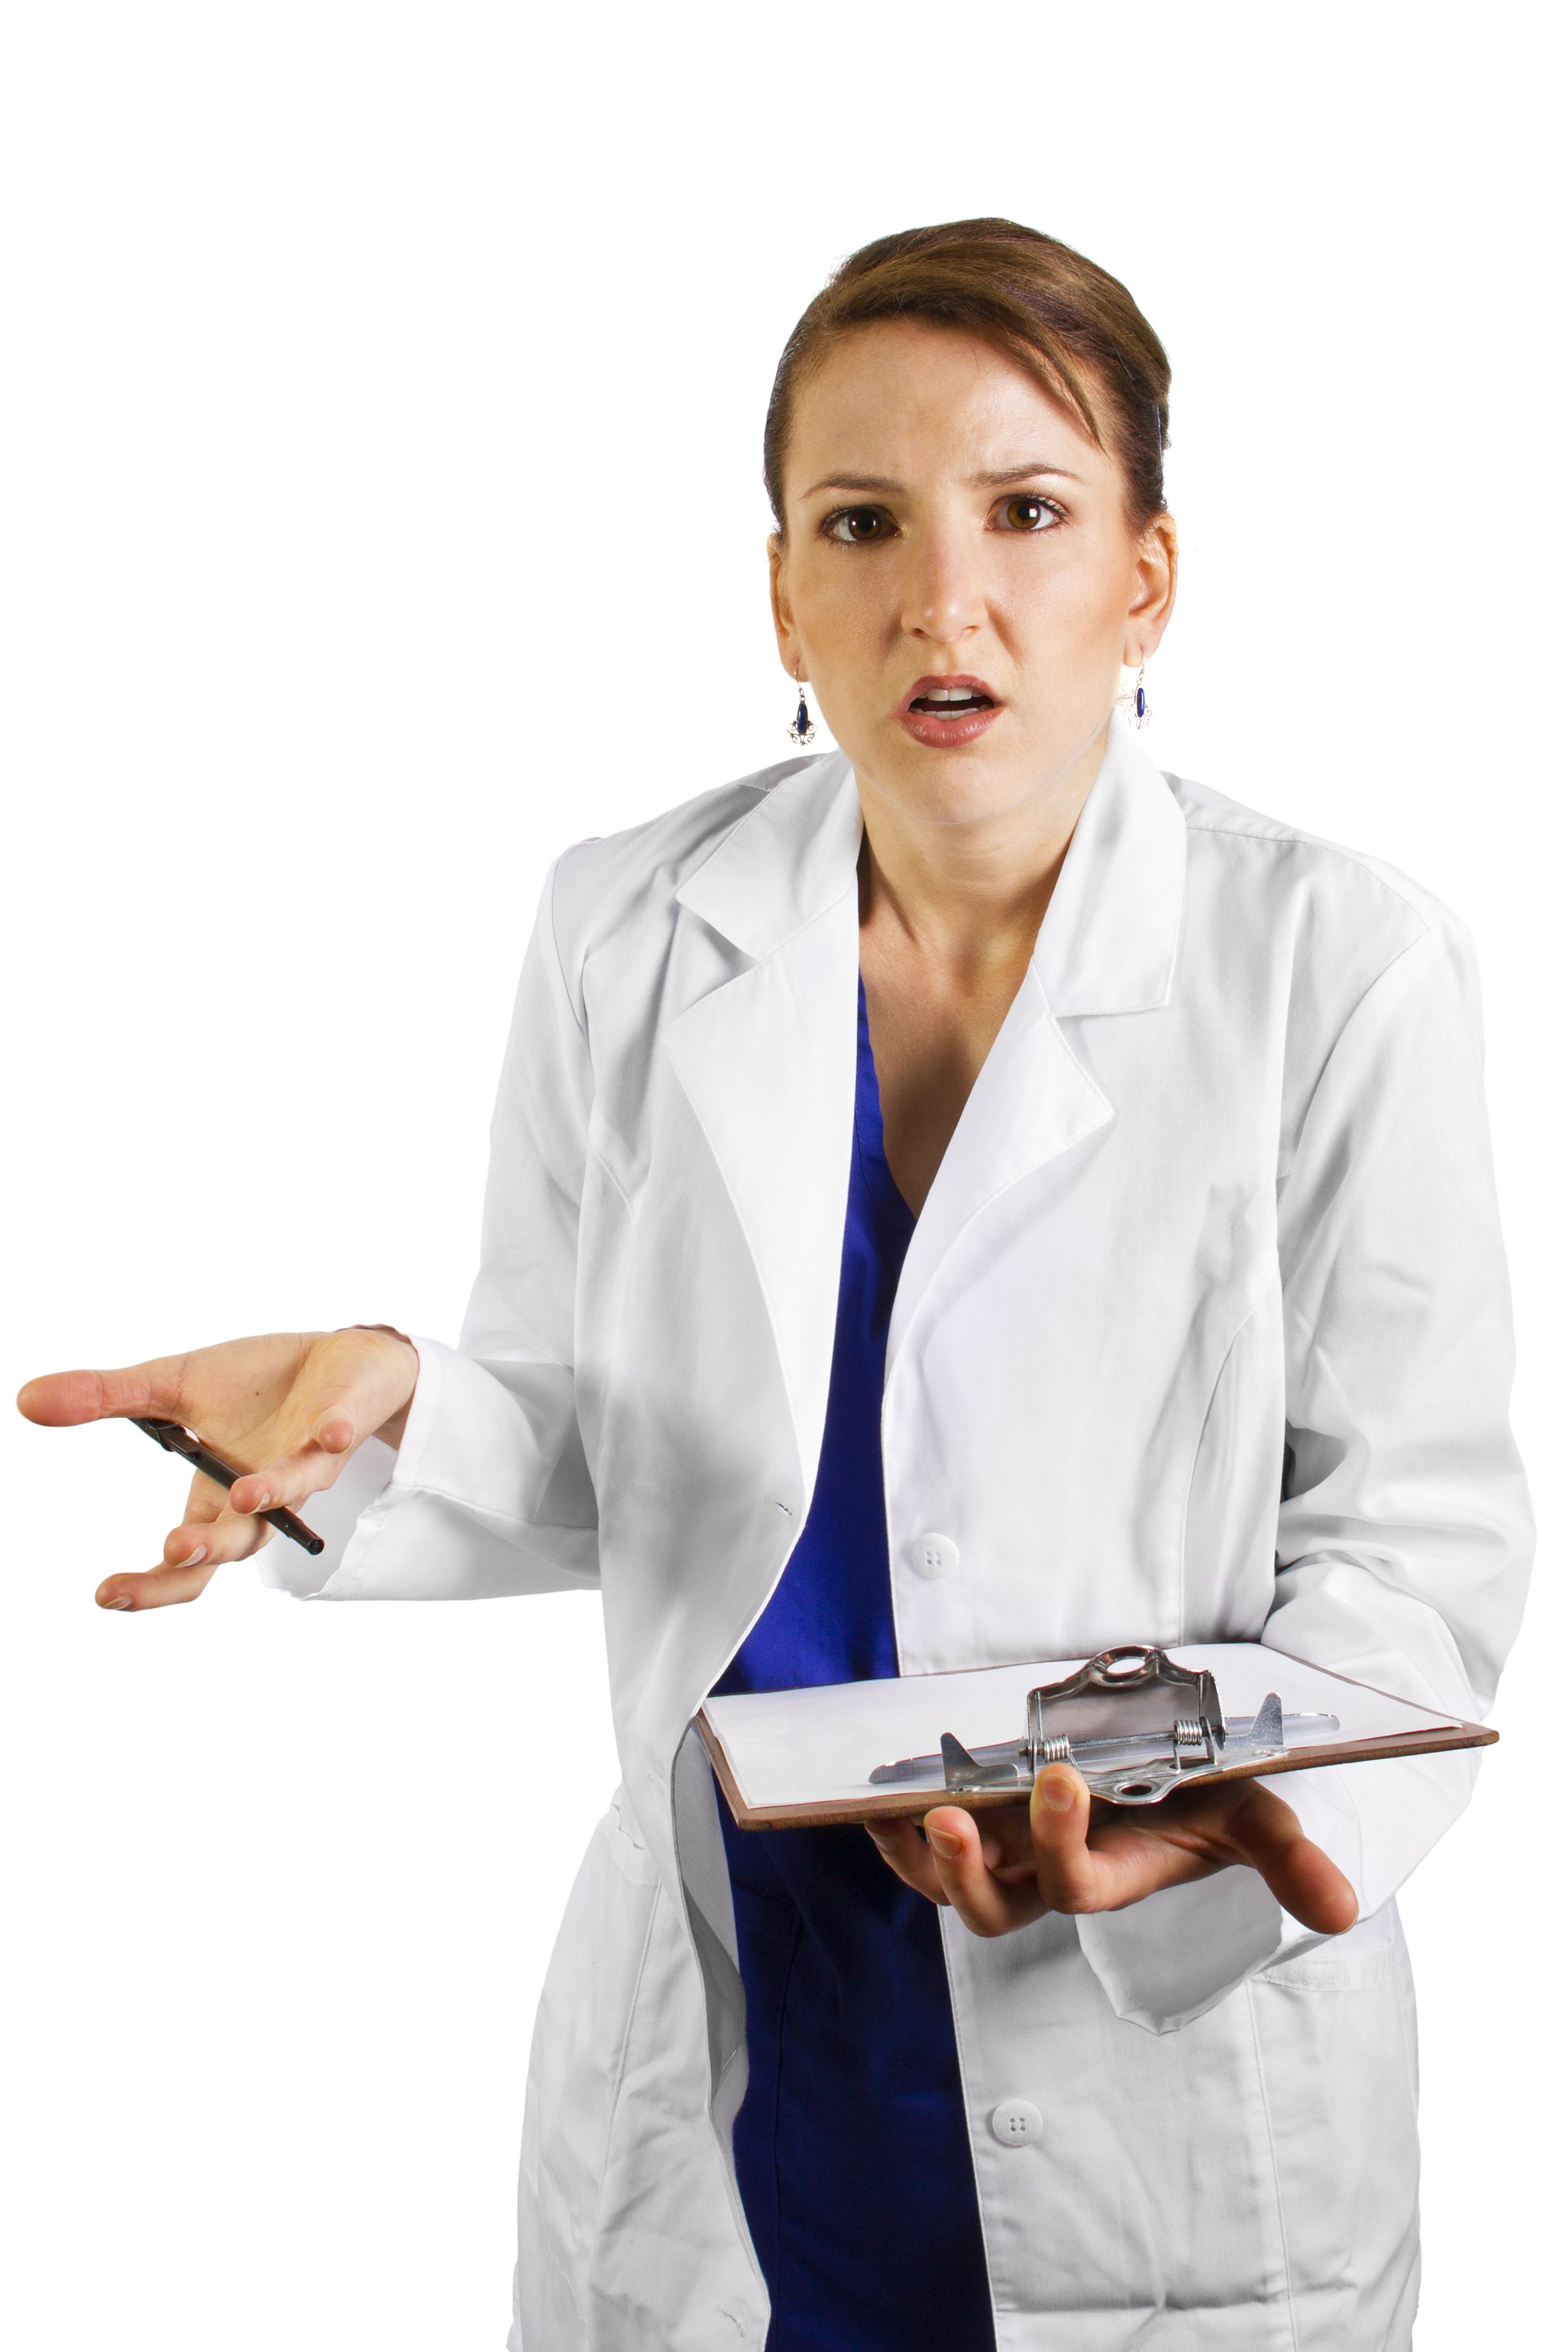 Stressed Out and Overworked Doctor or Nurse on White Background